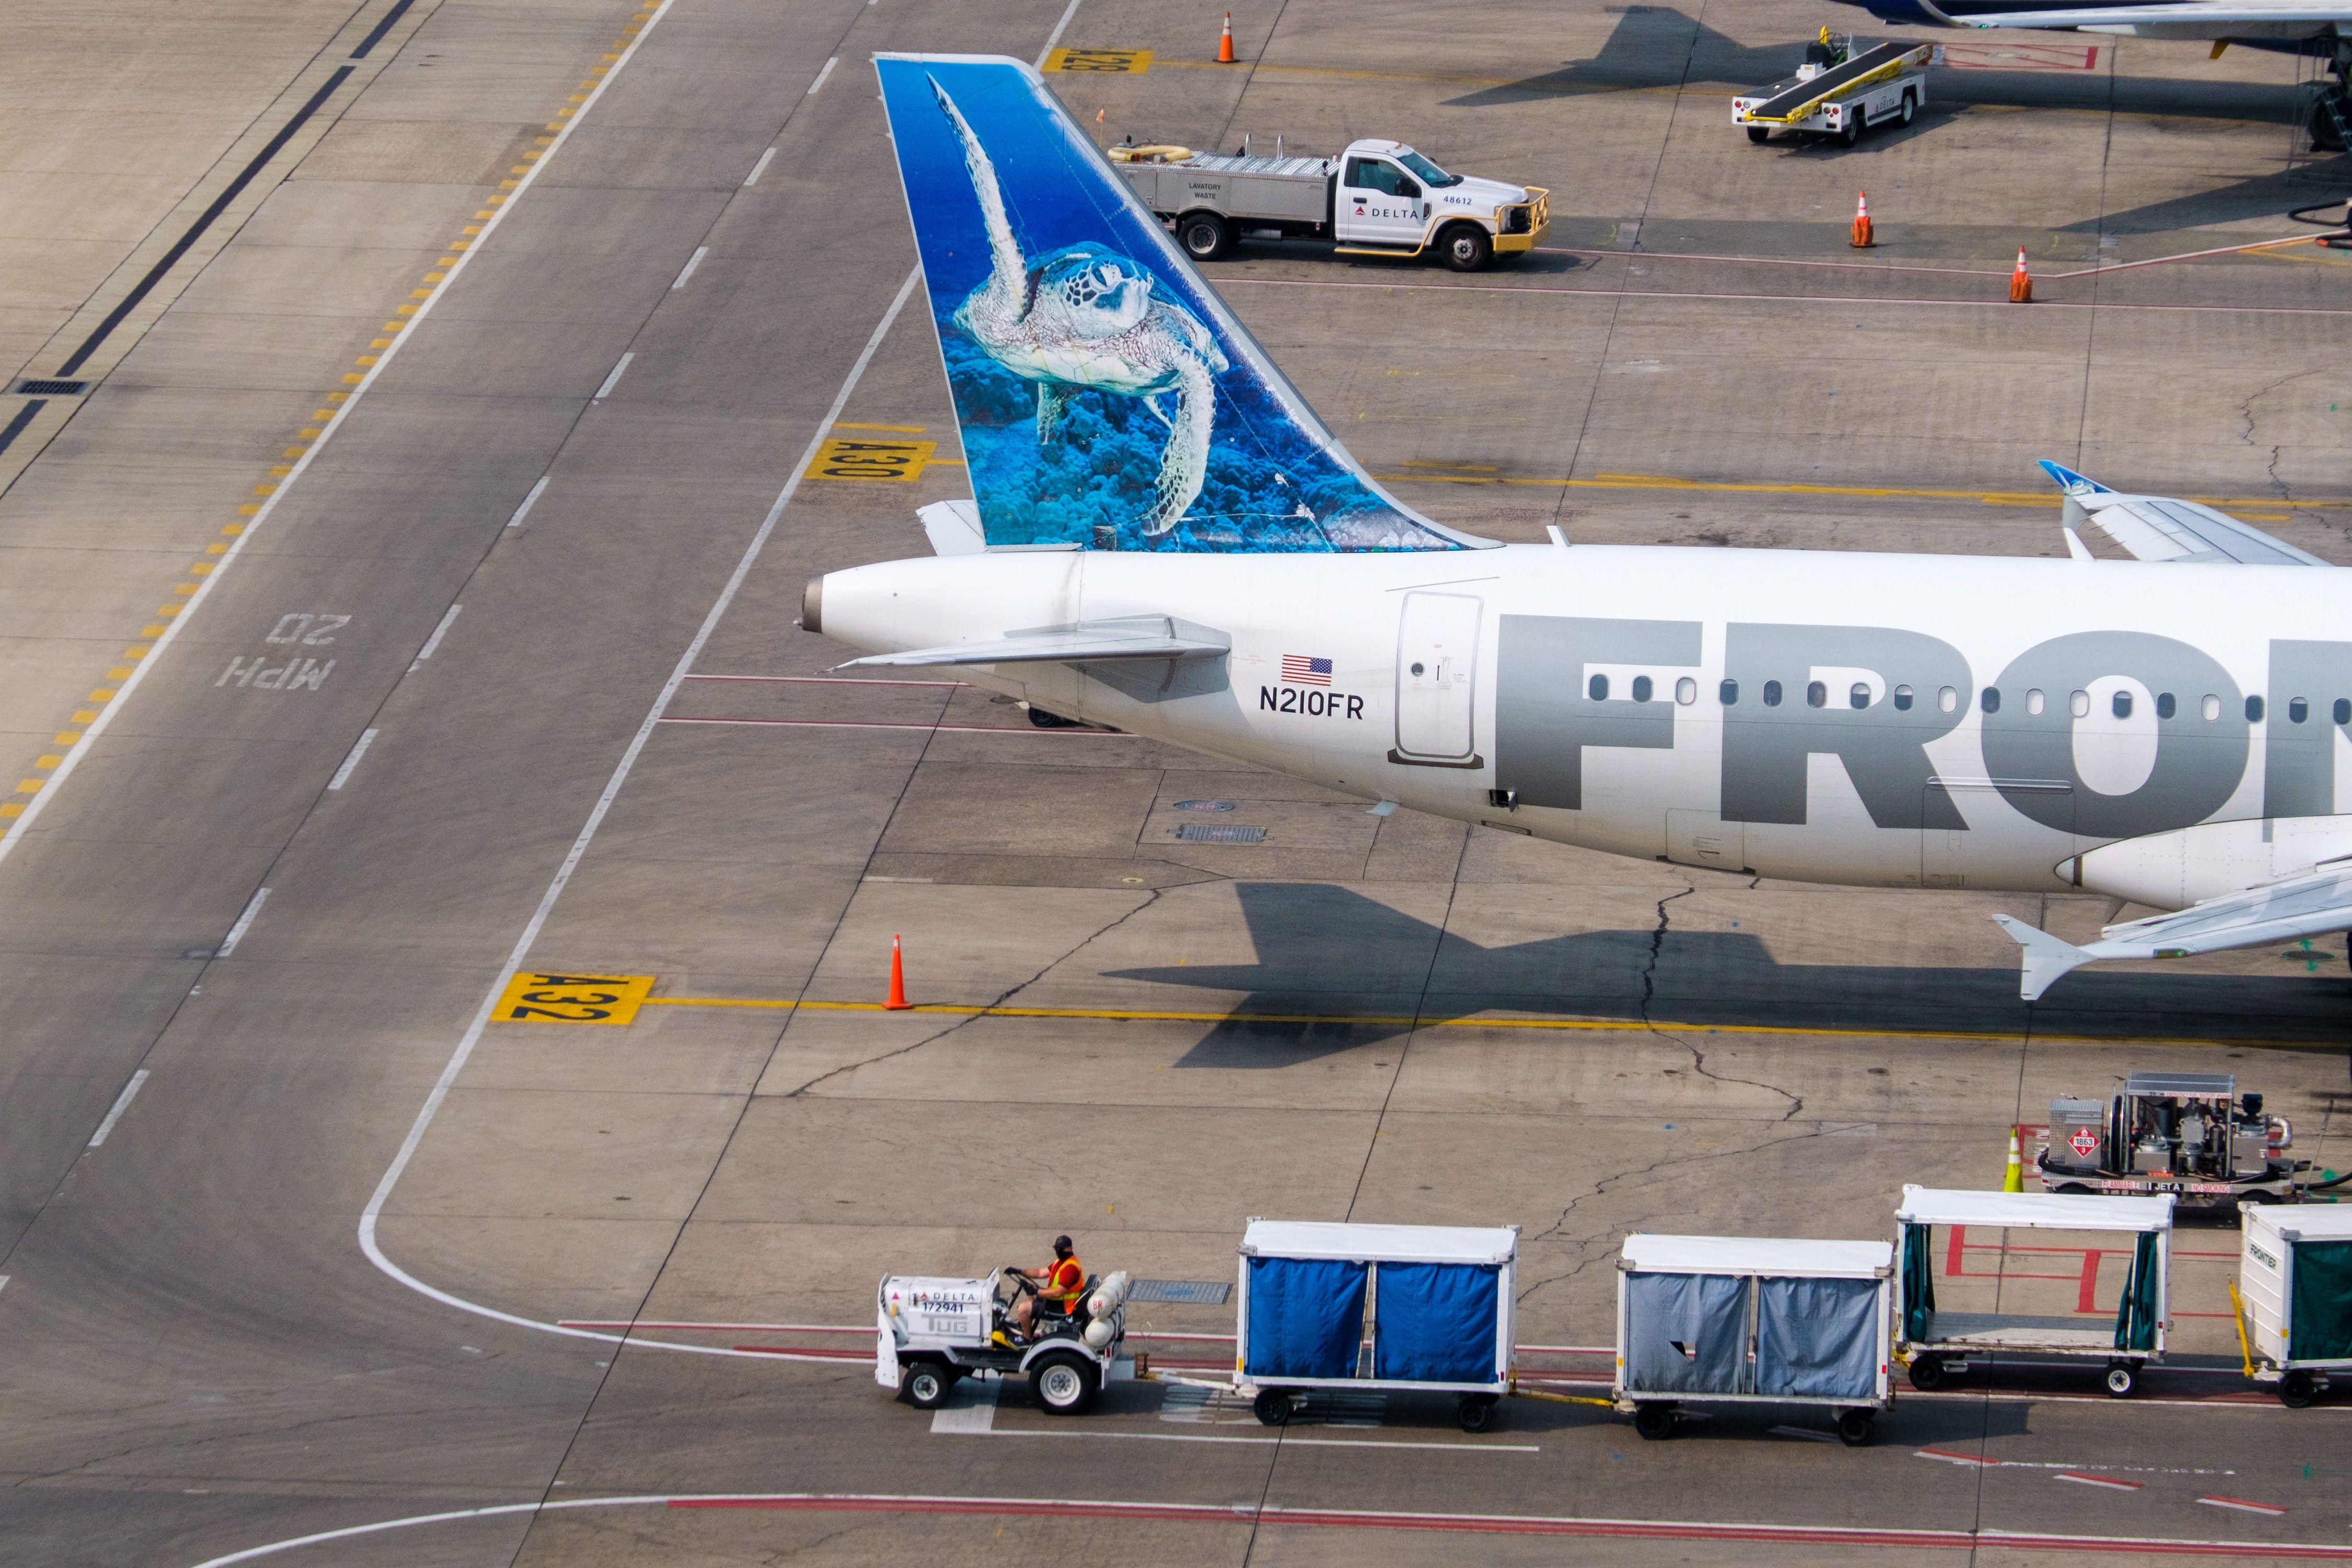 The rear half of a Frontier Airlines aircraft parked on an airport apron.